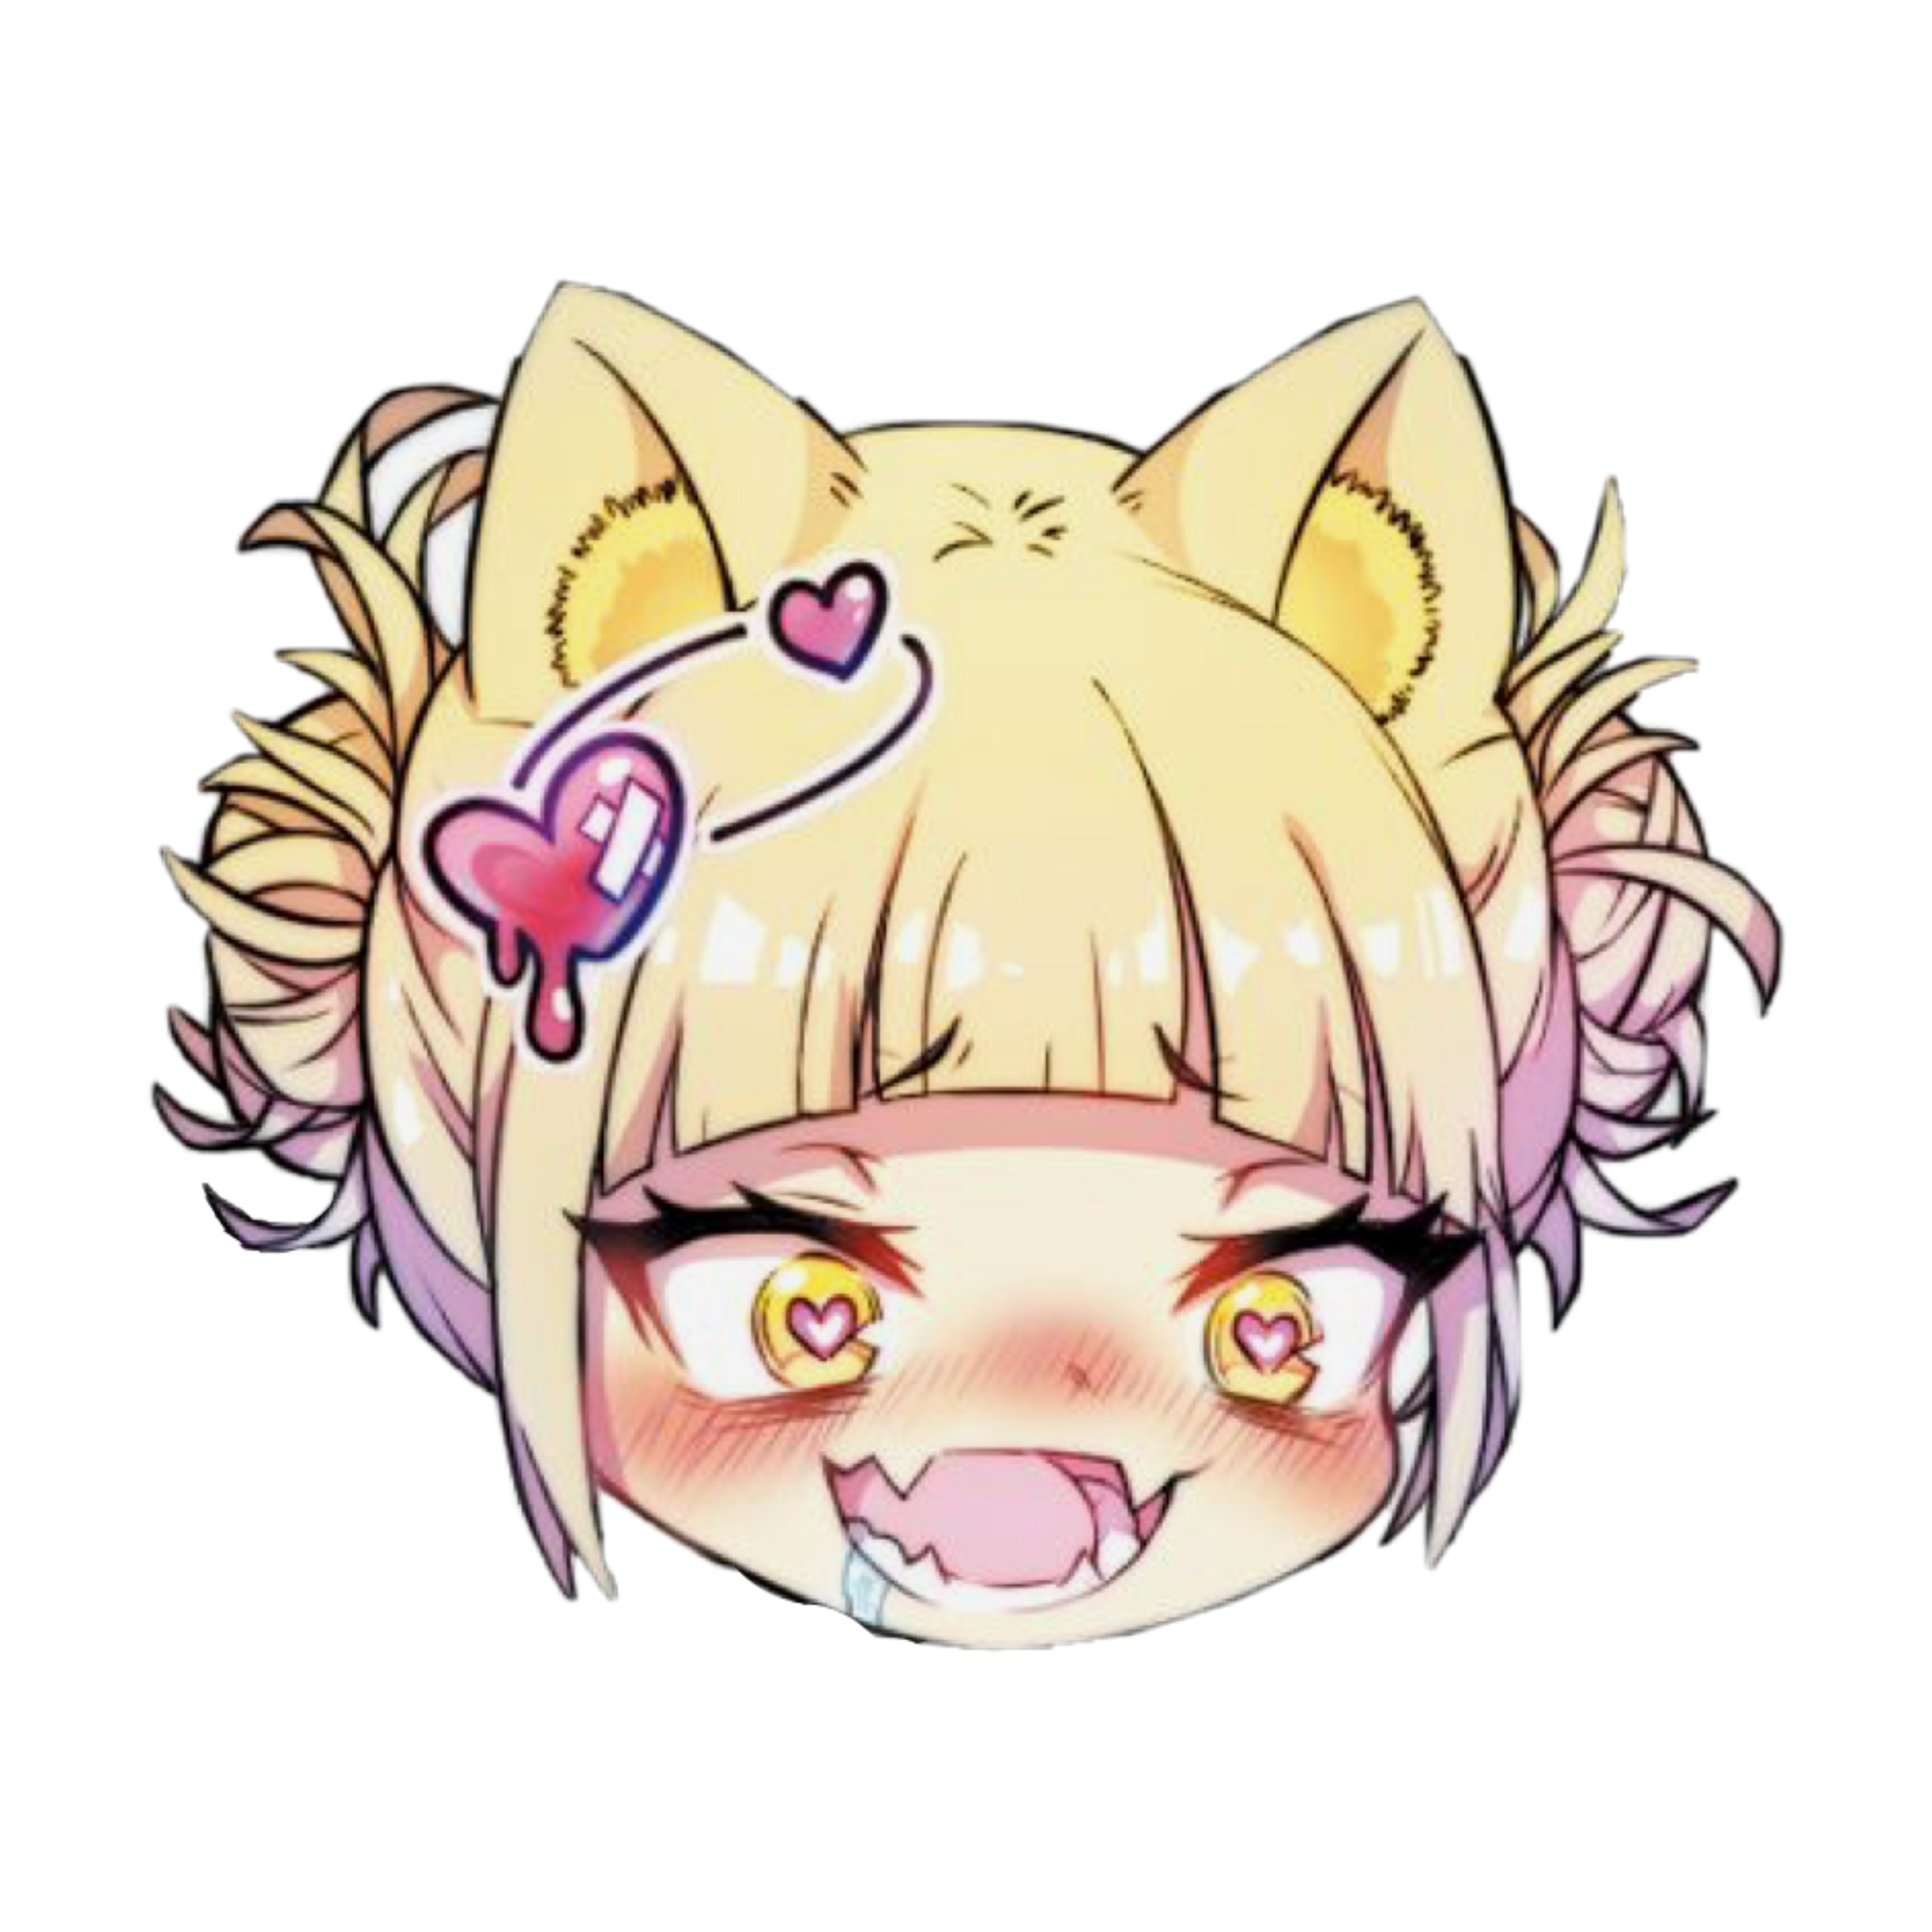 freetoedit himiko toga sticker by @todo_half_and_half.